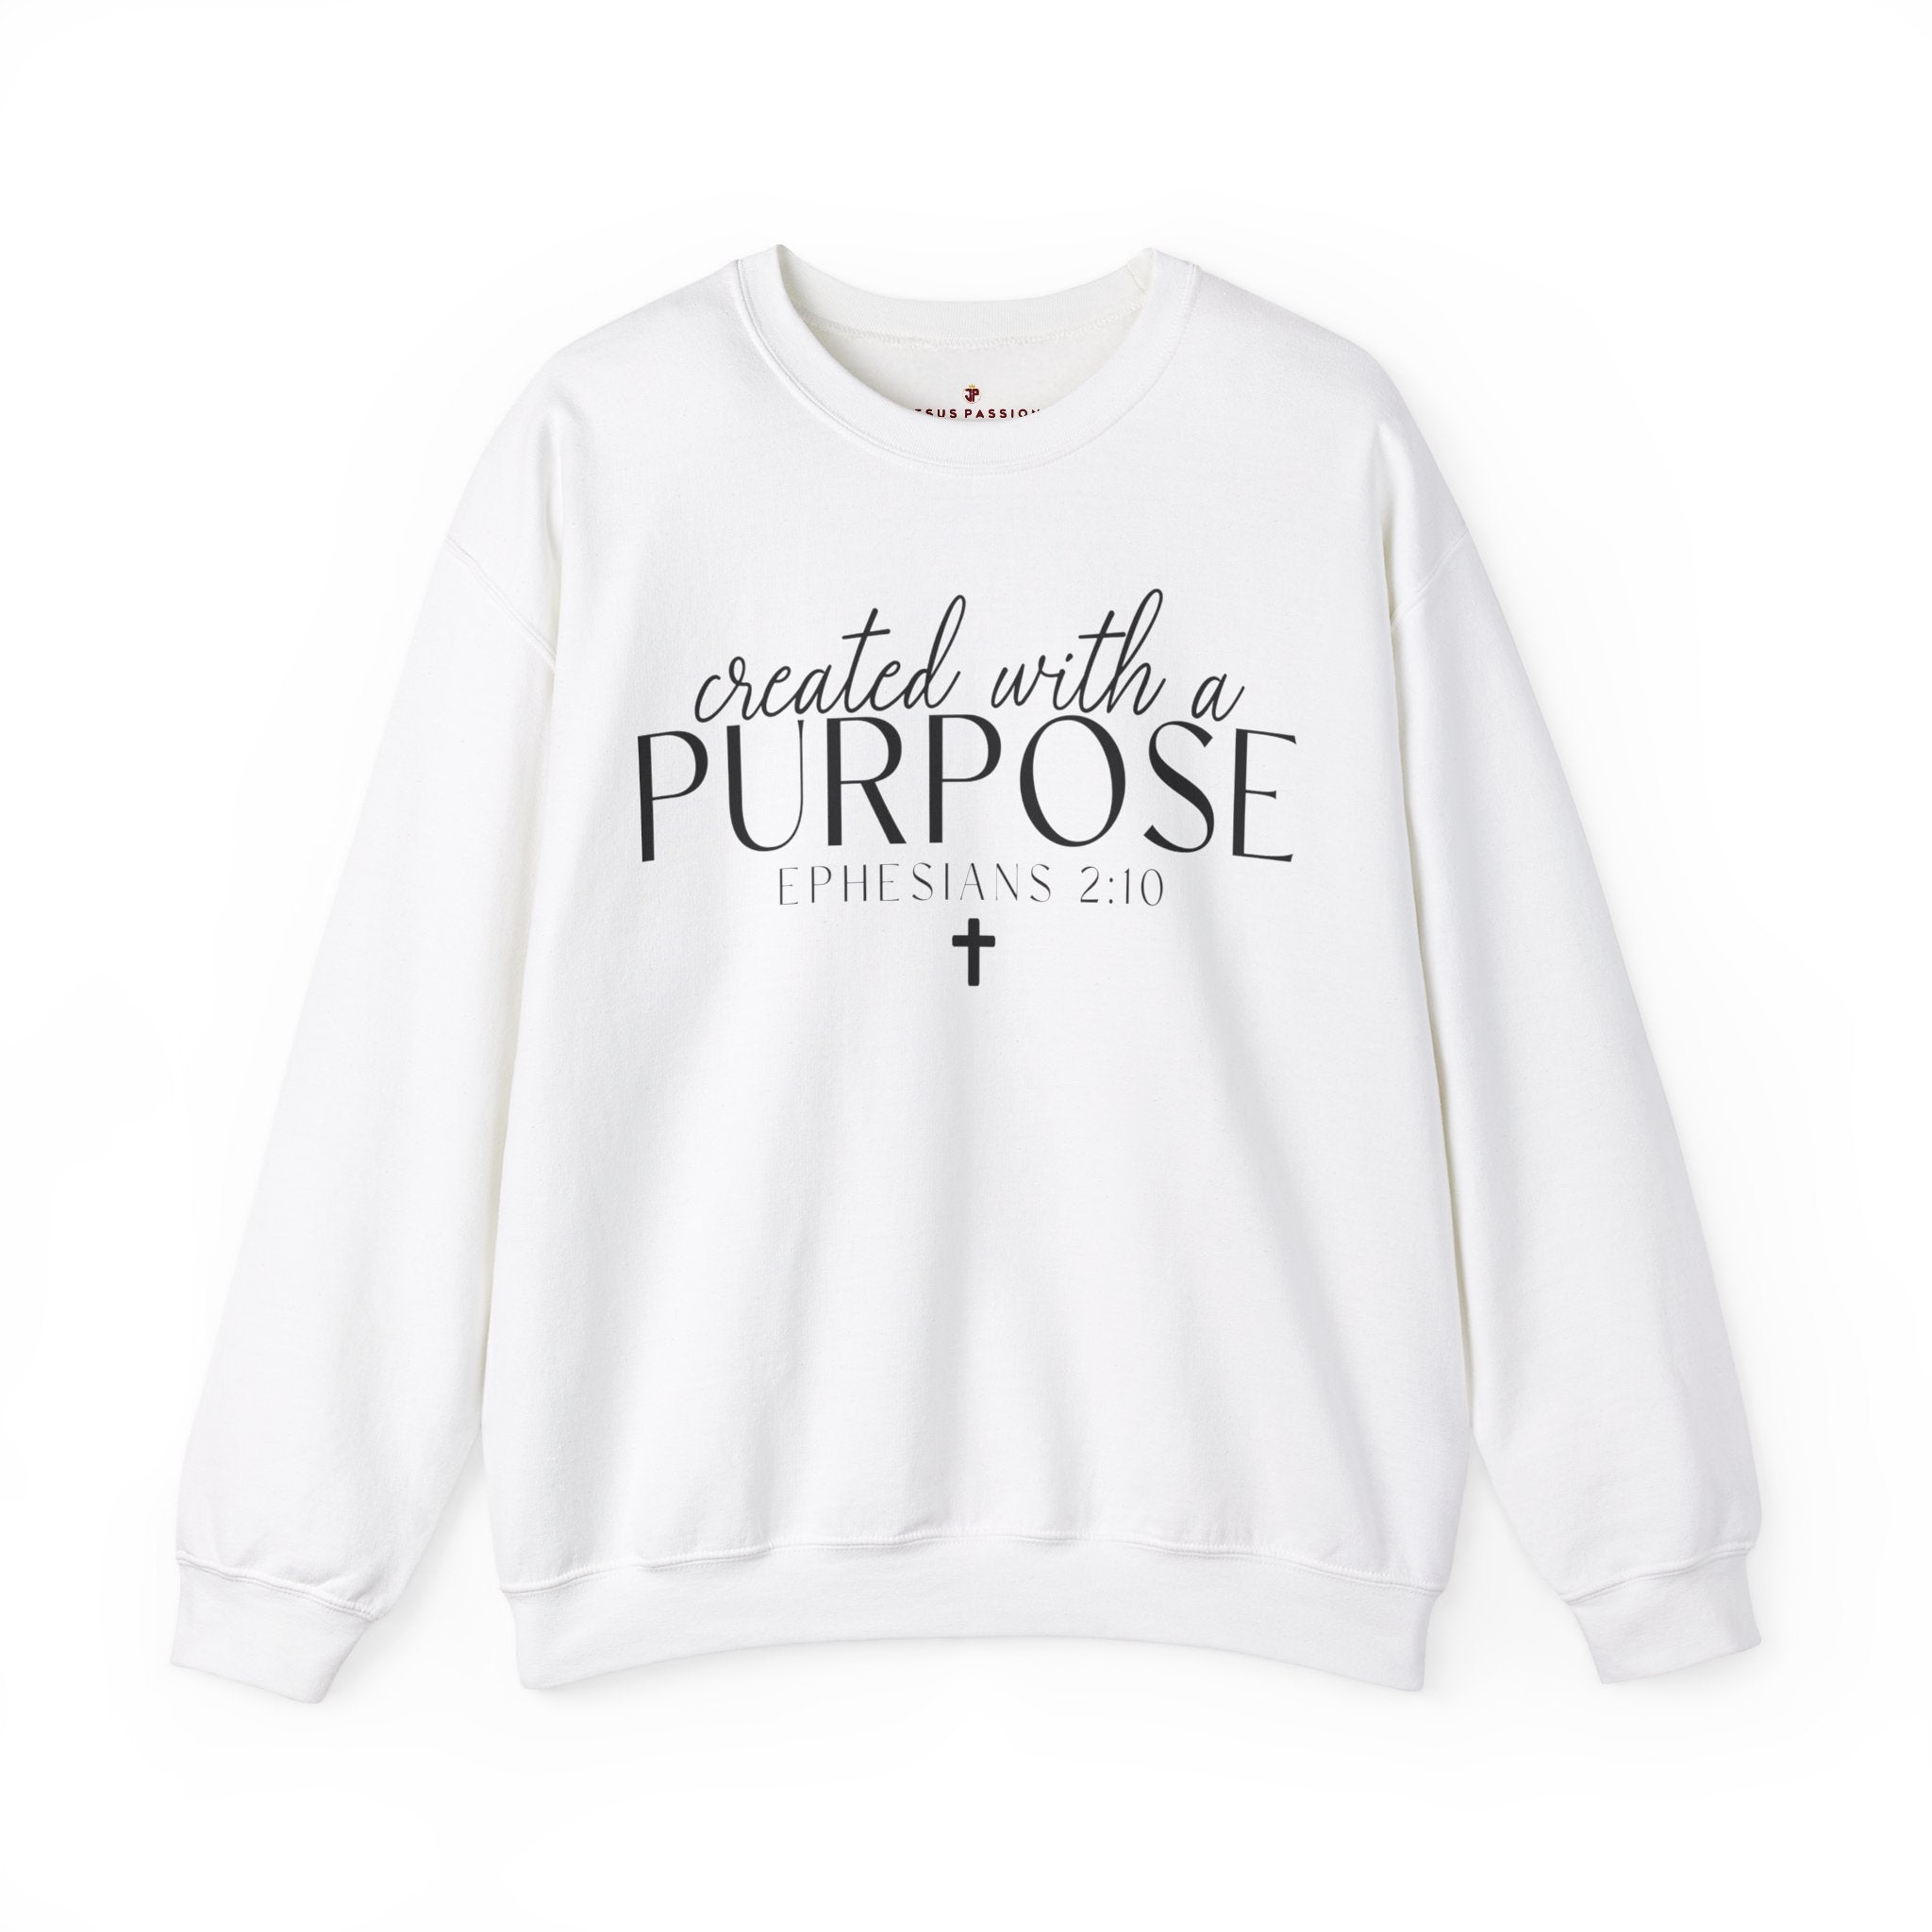 Created with a Purpose Women's Fleece Unisex-Fit Sweatshirt White / Sport Grey Sizes: S Colors: White Jesus Passion Apparel